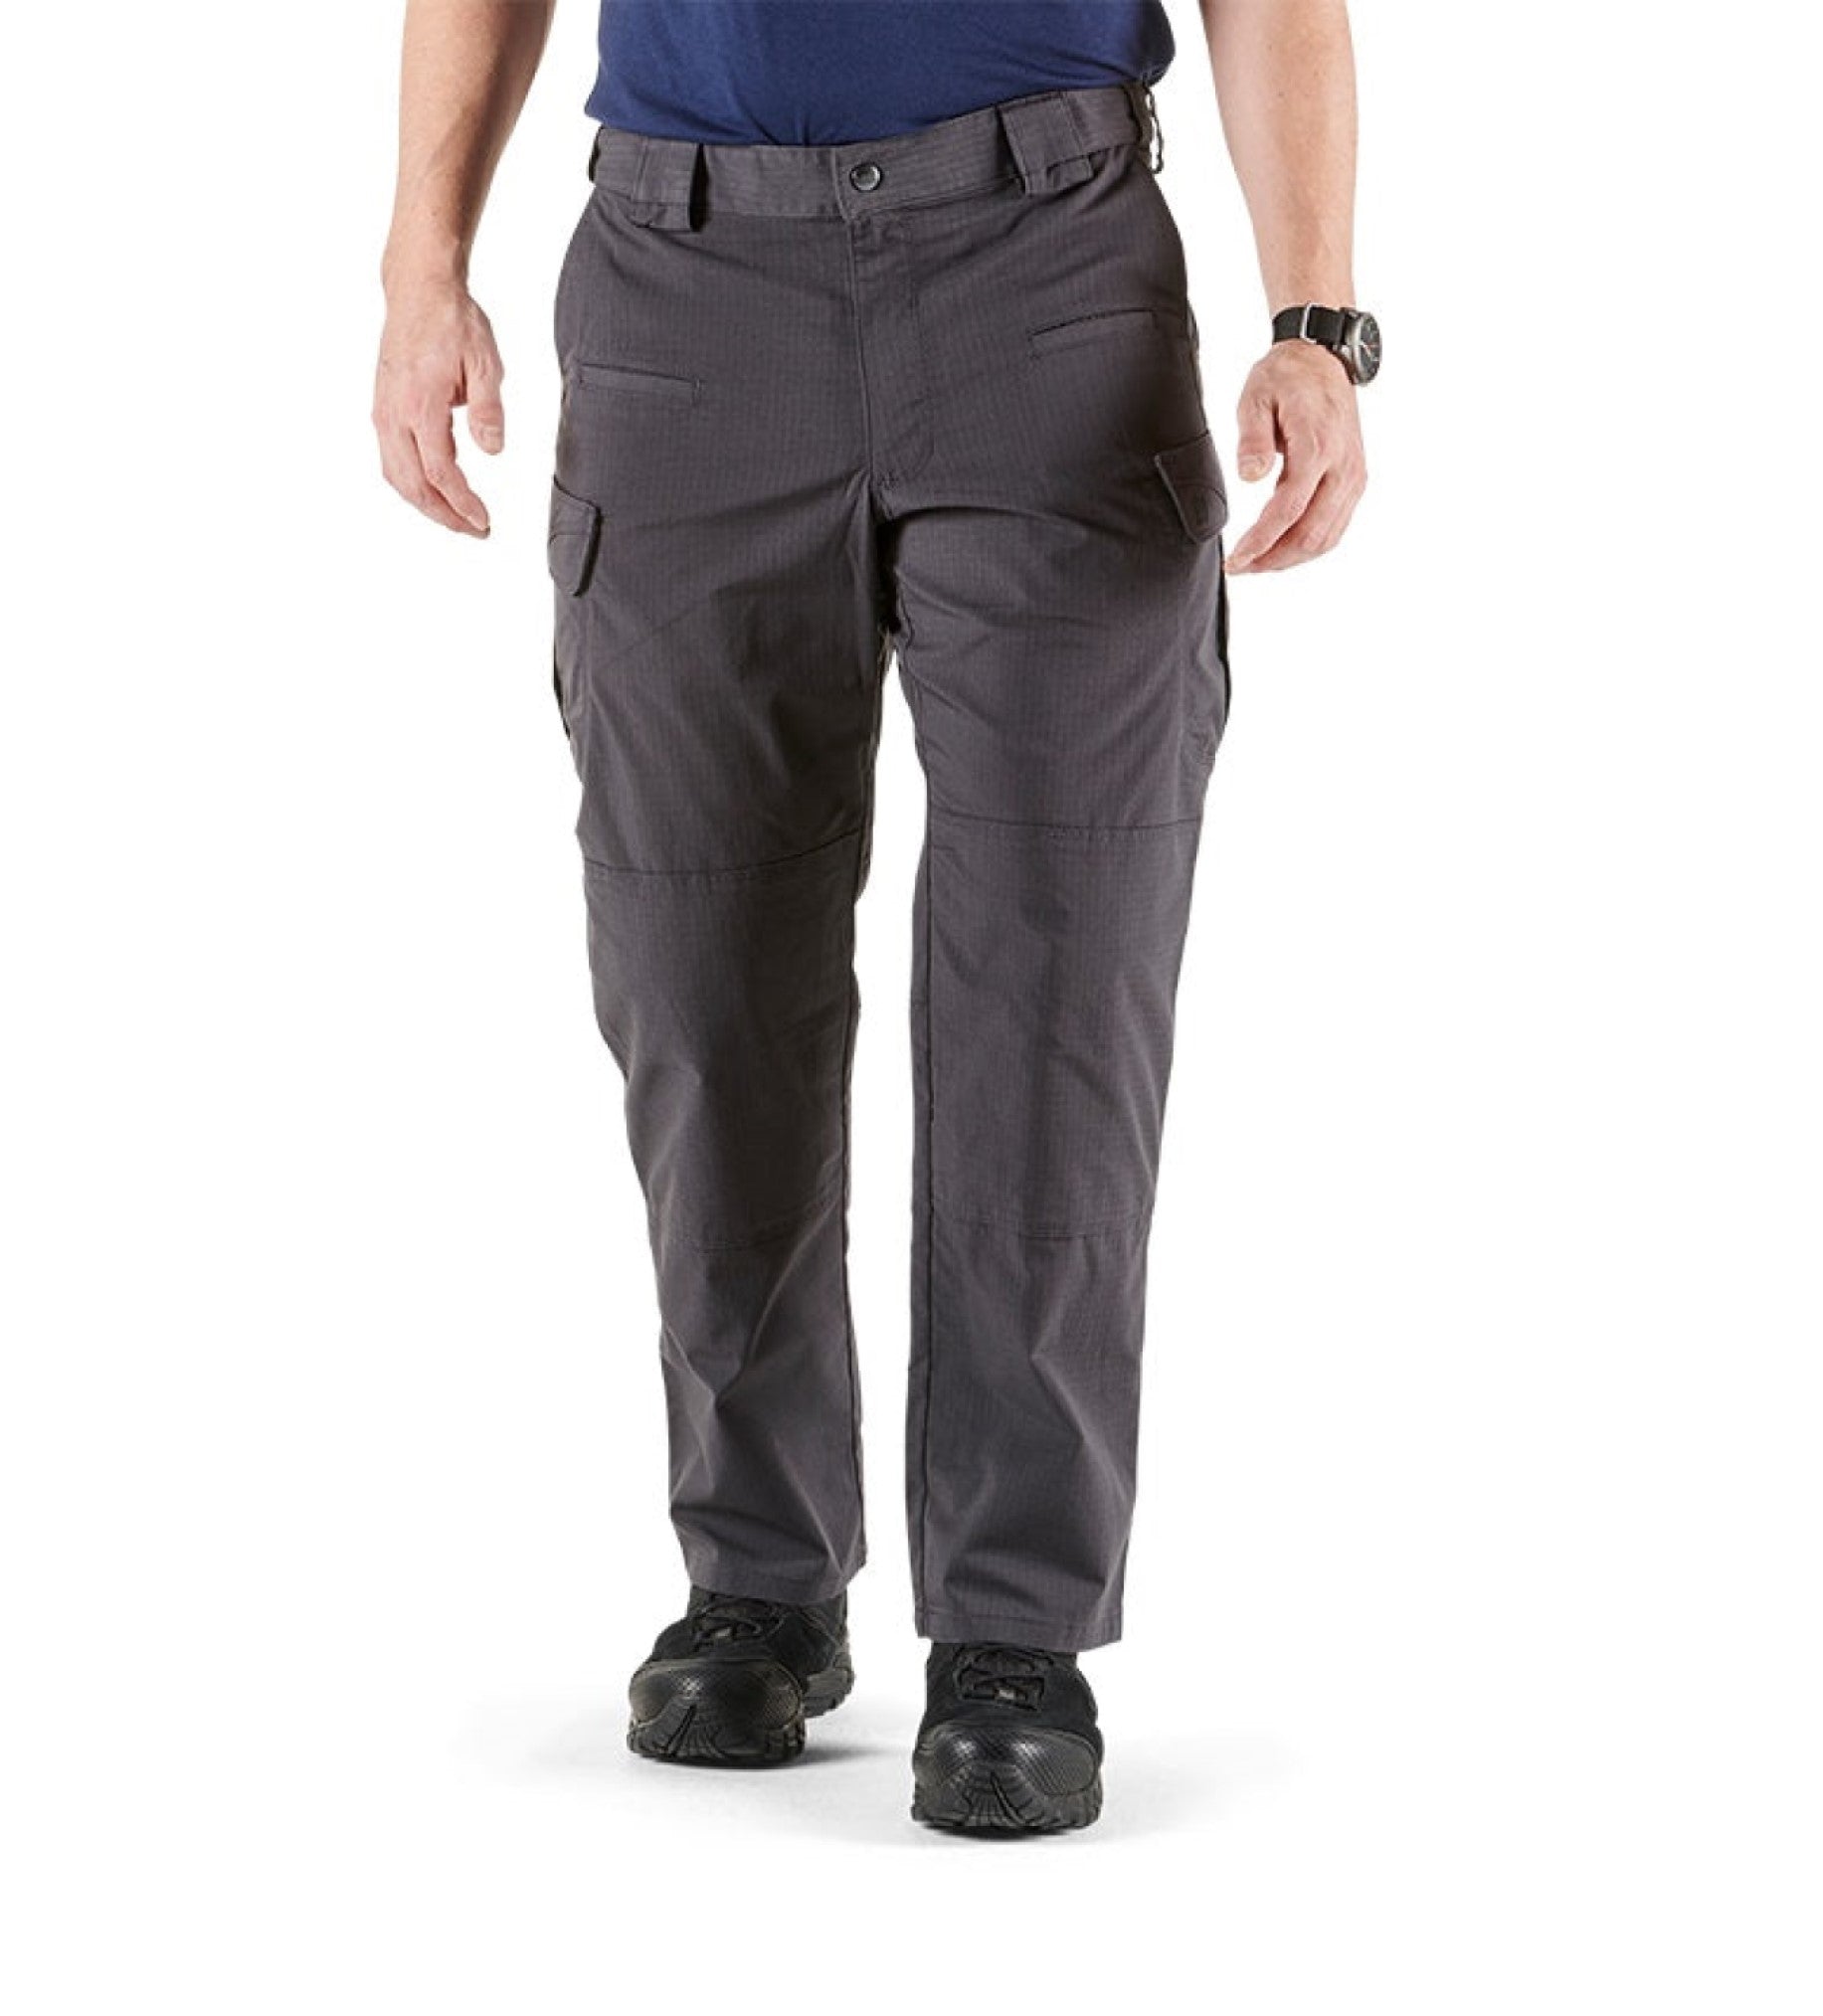 5.11® Tactical Men's Tactical Stryke Pant_Charcoal - Work World - Workwear, Work Boots, Safety Gear